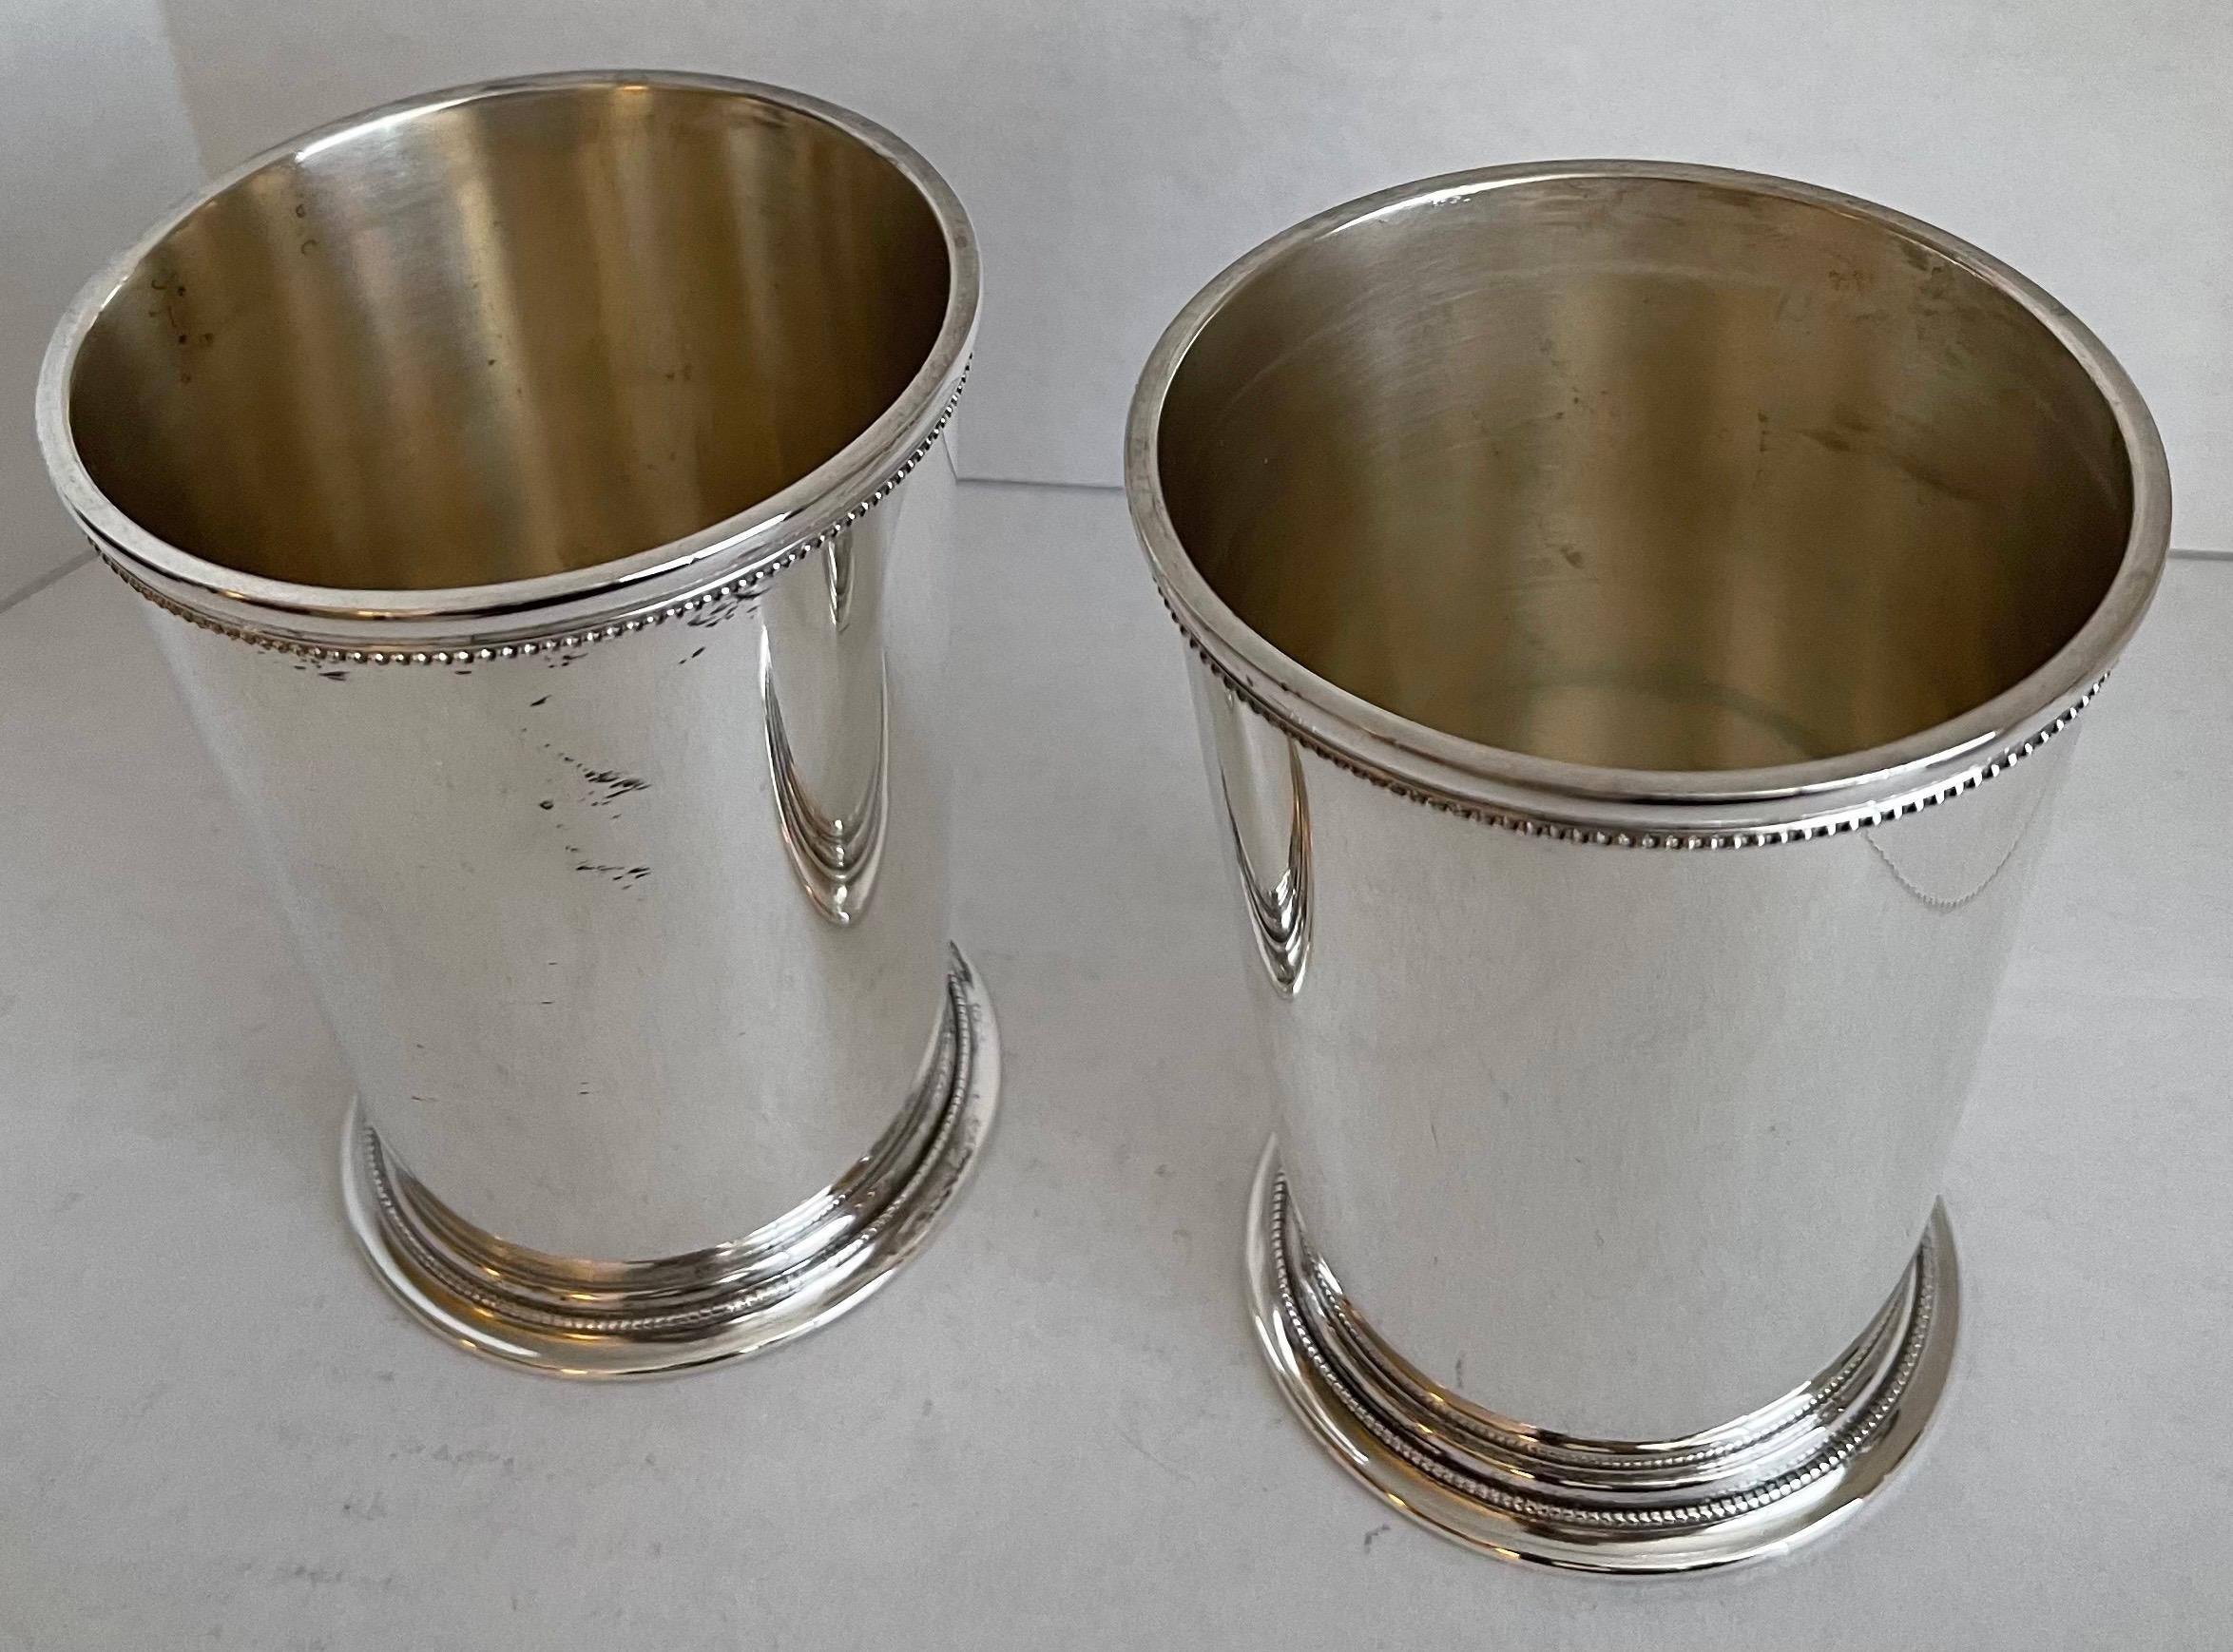 Pair of Patrick Henry silver plated julep cups. Beaded rim and fluted base. Newly polished to a high shine. Stamped on the underside Made in England.